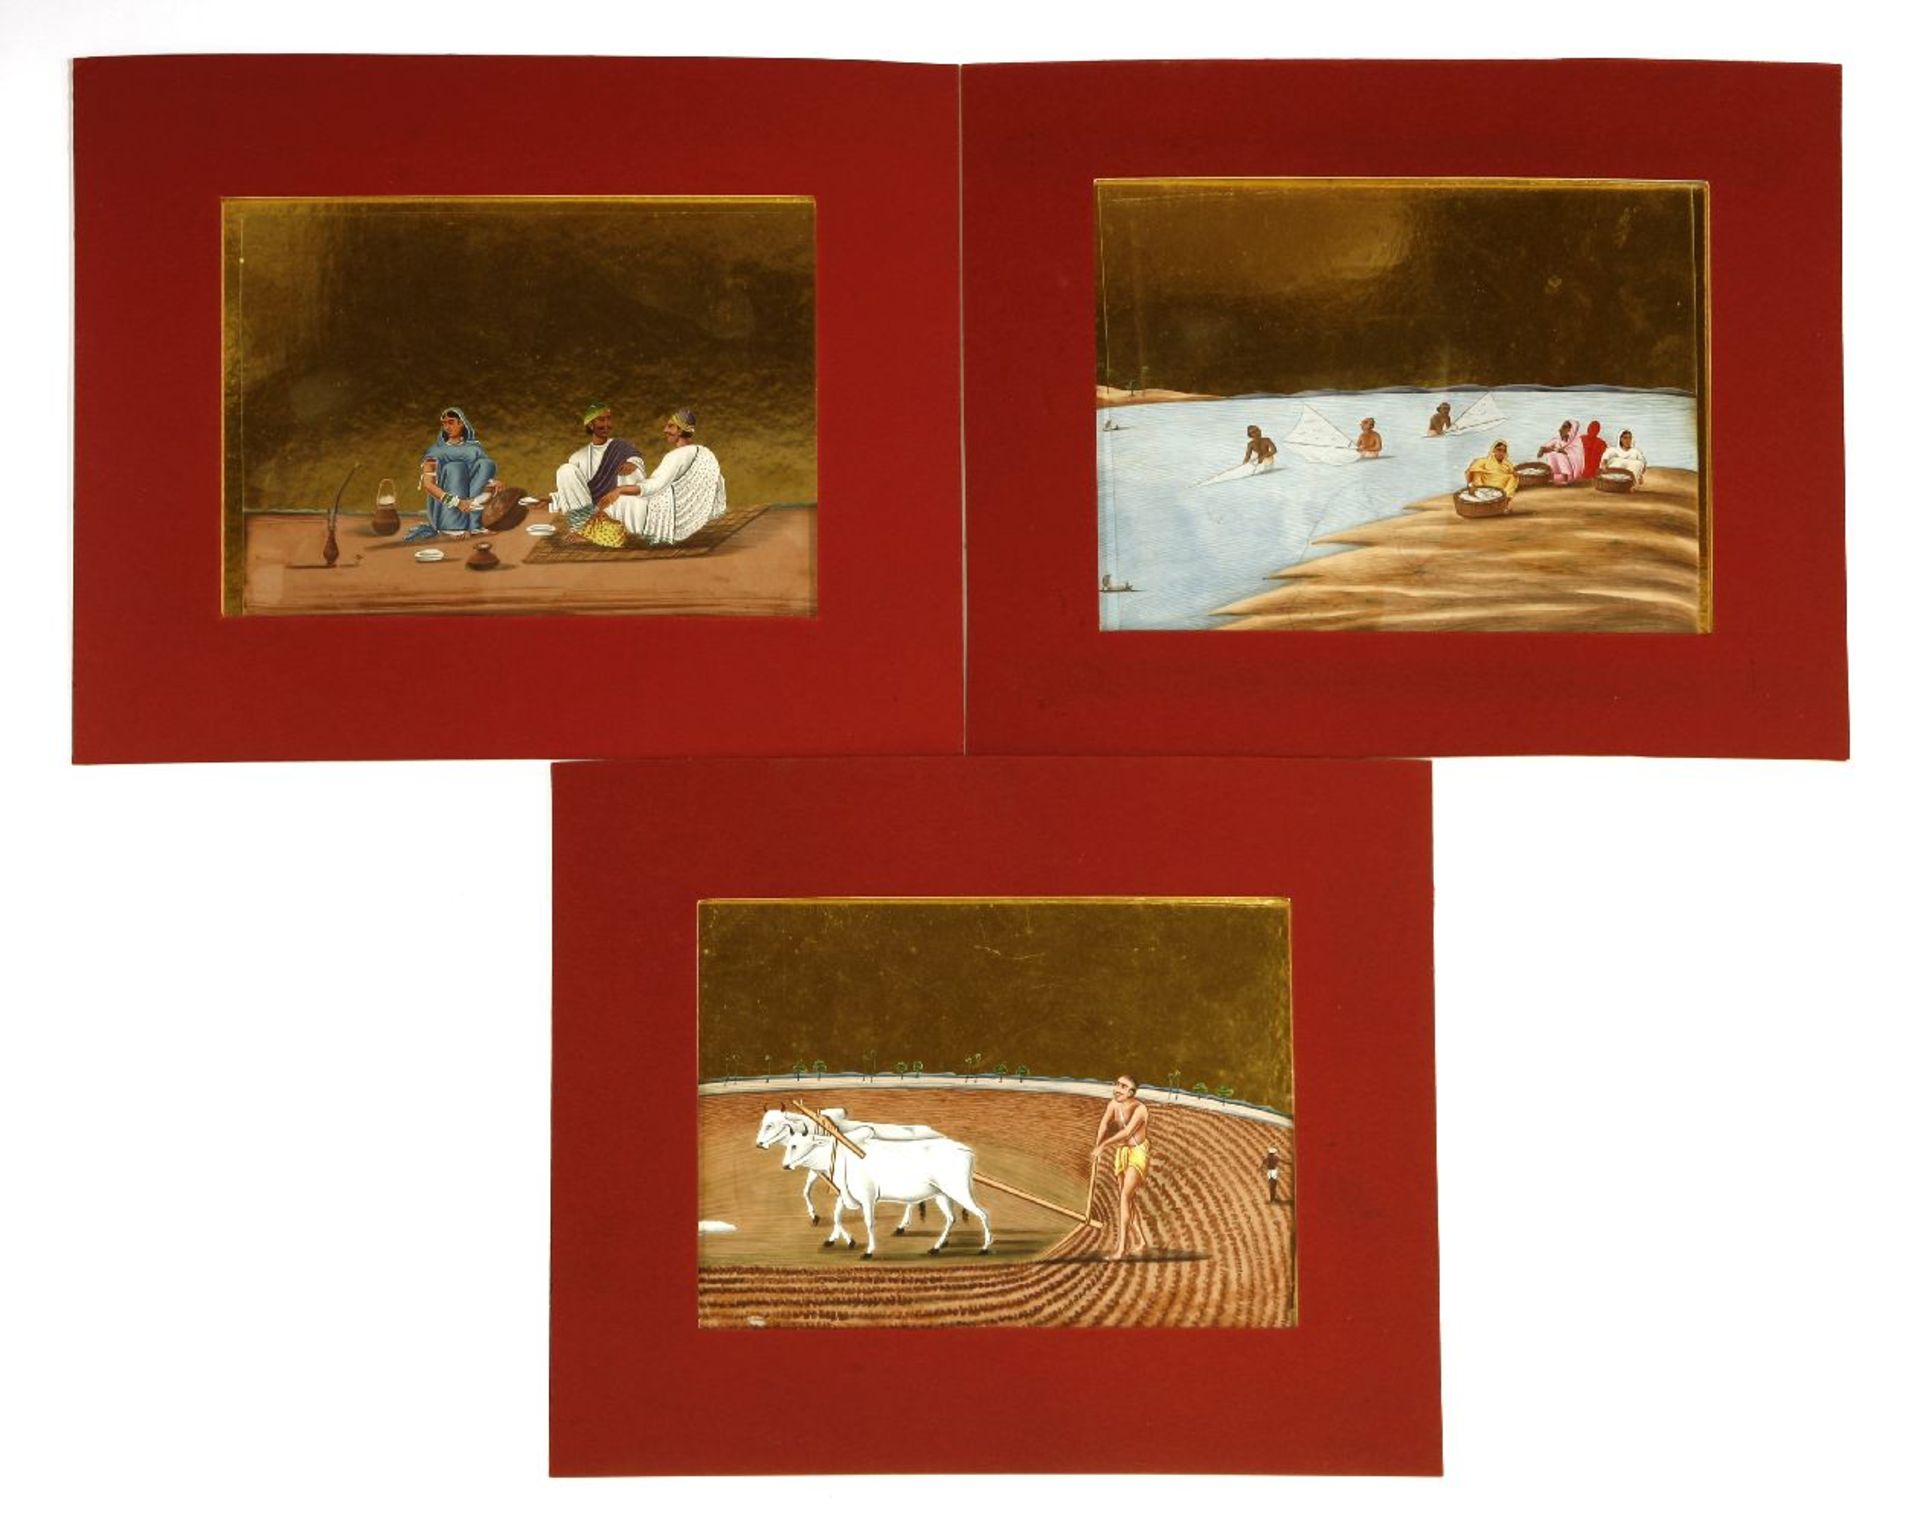 Three Indian paintings on mica,c.1815, Patna, depicting ploughing, fishing and shopping,14 x 17.